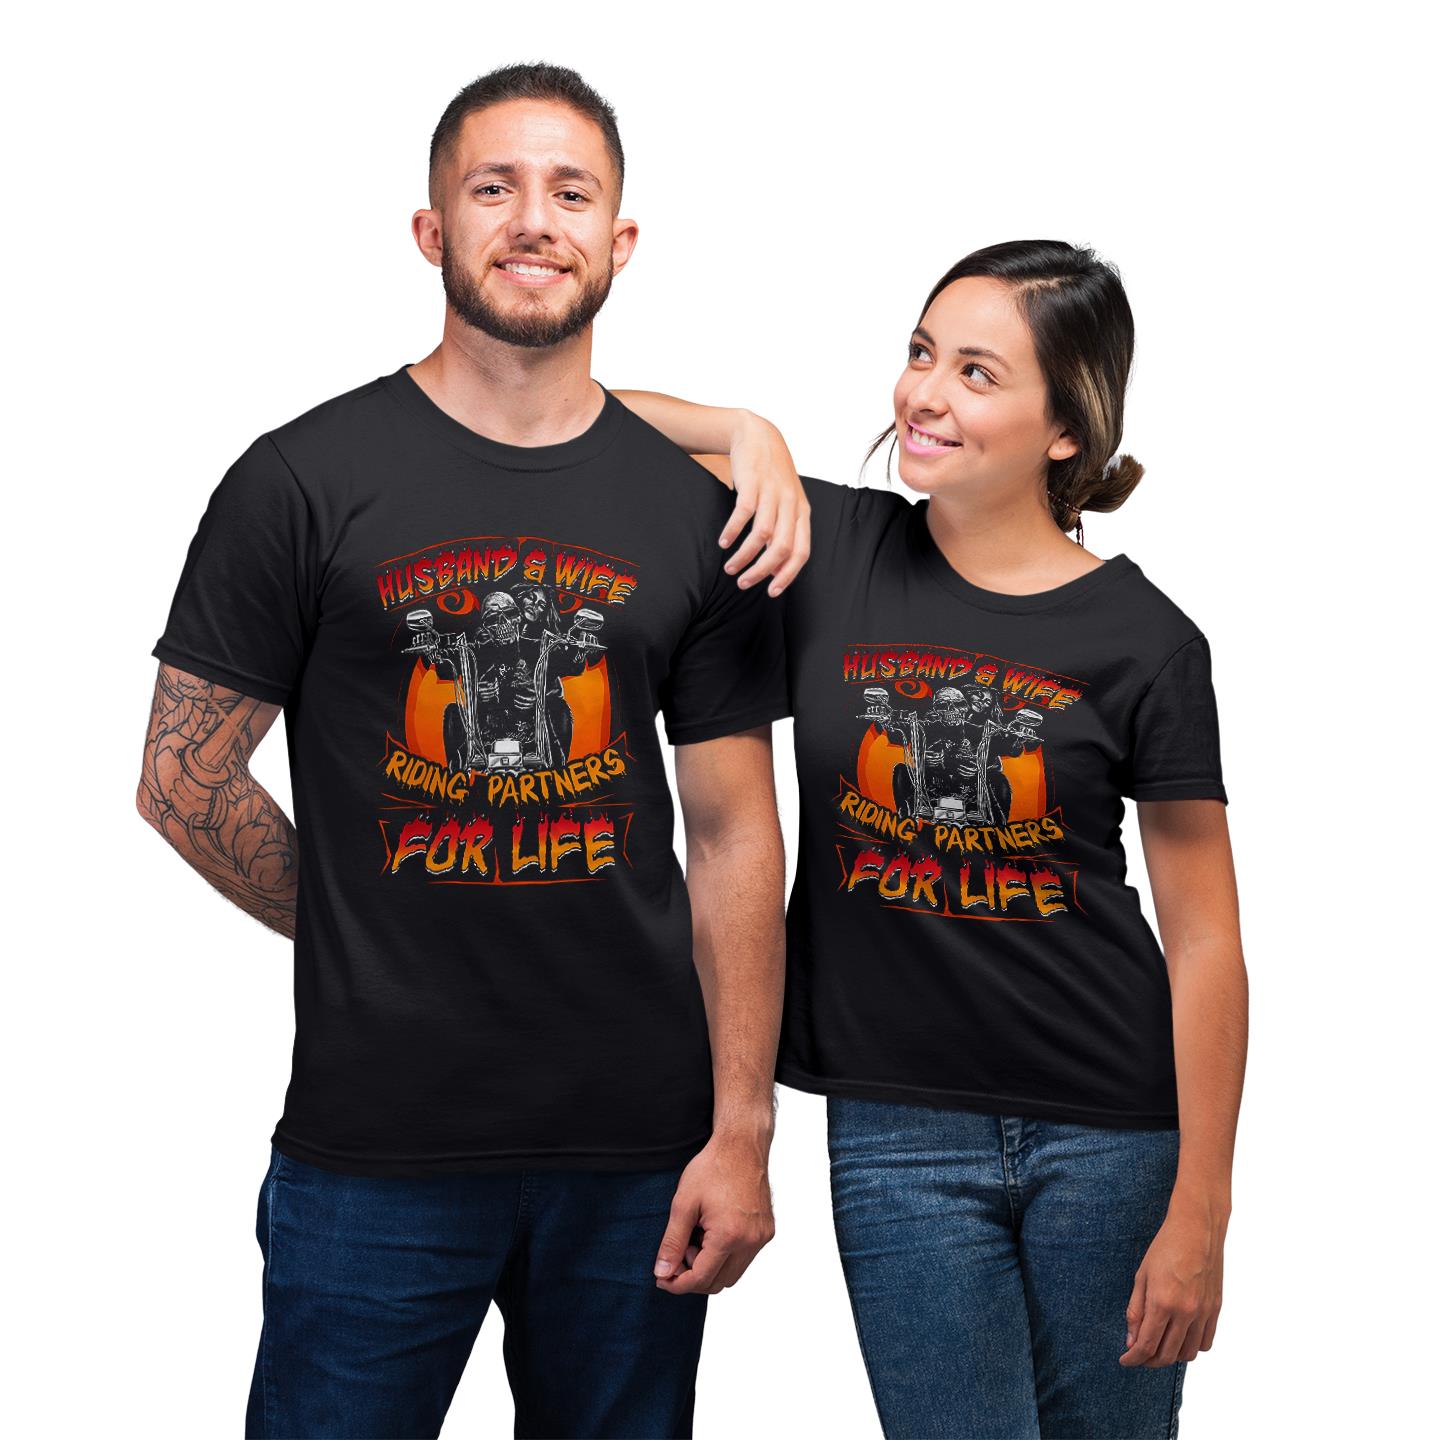 Husband And Wife Riding Partners In Life For Couple Lover Matching T-shirt